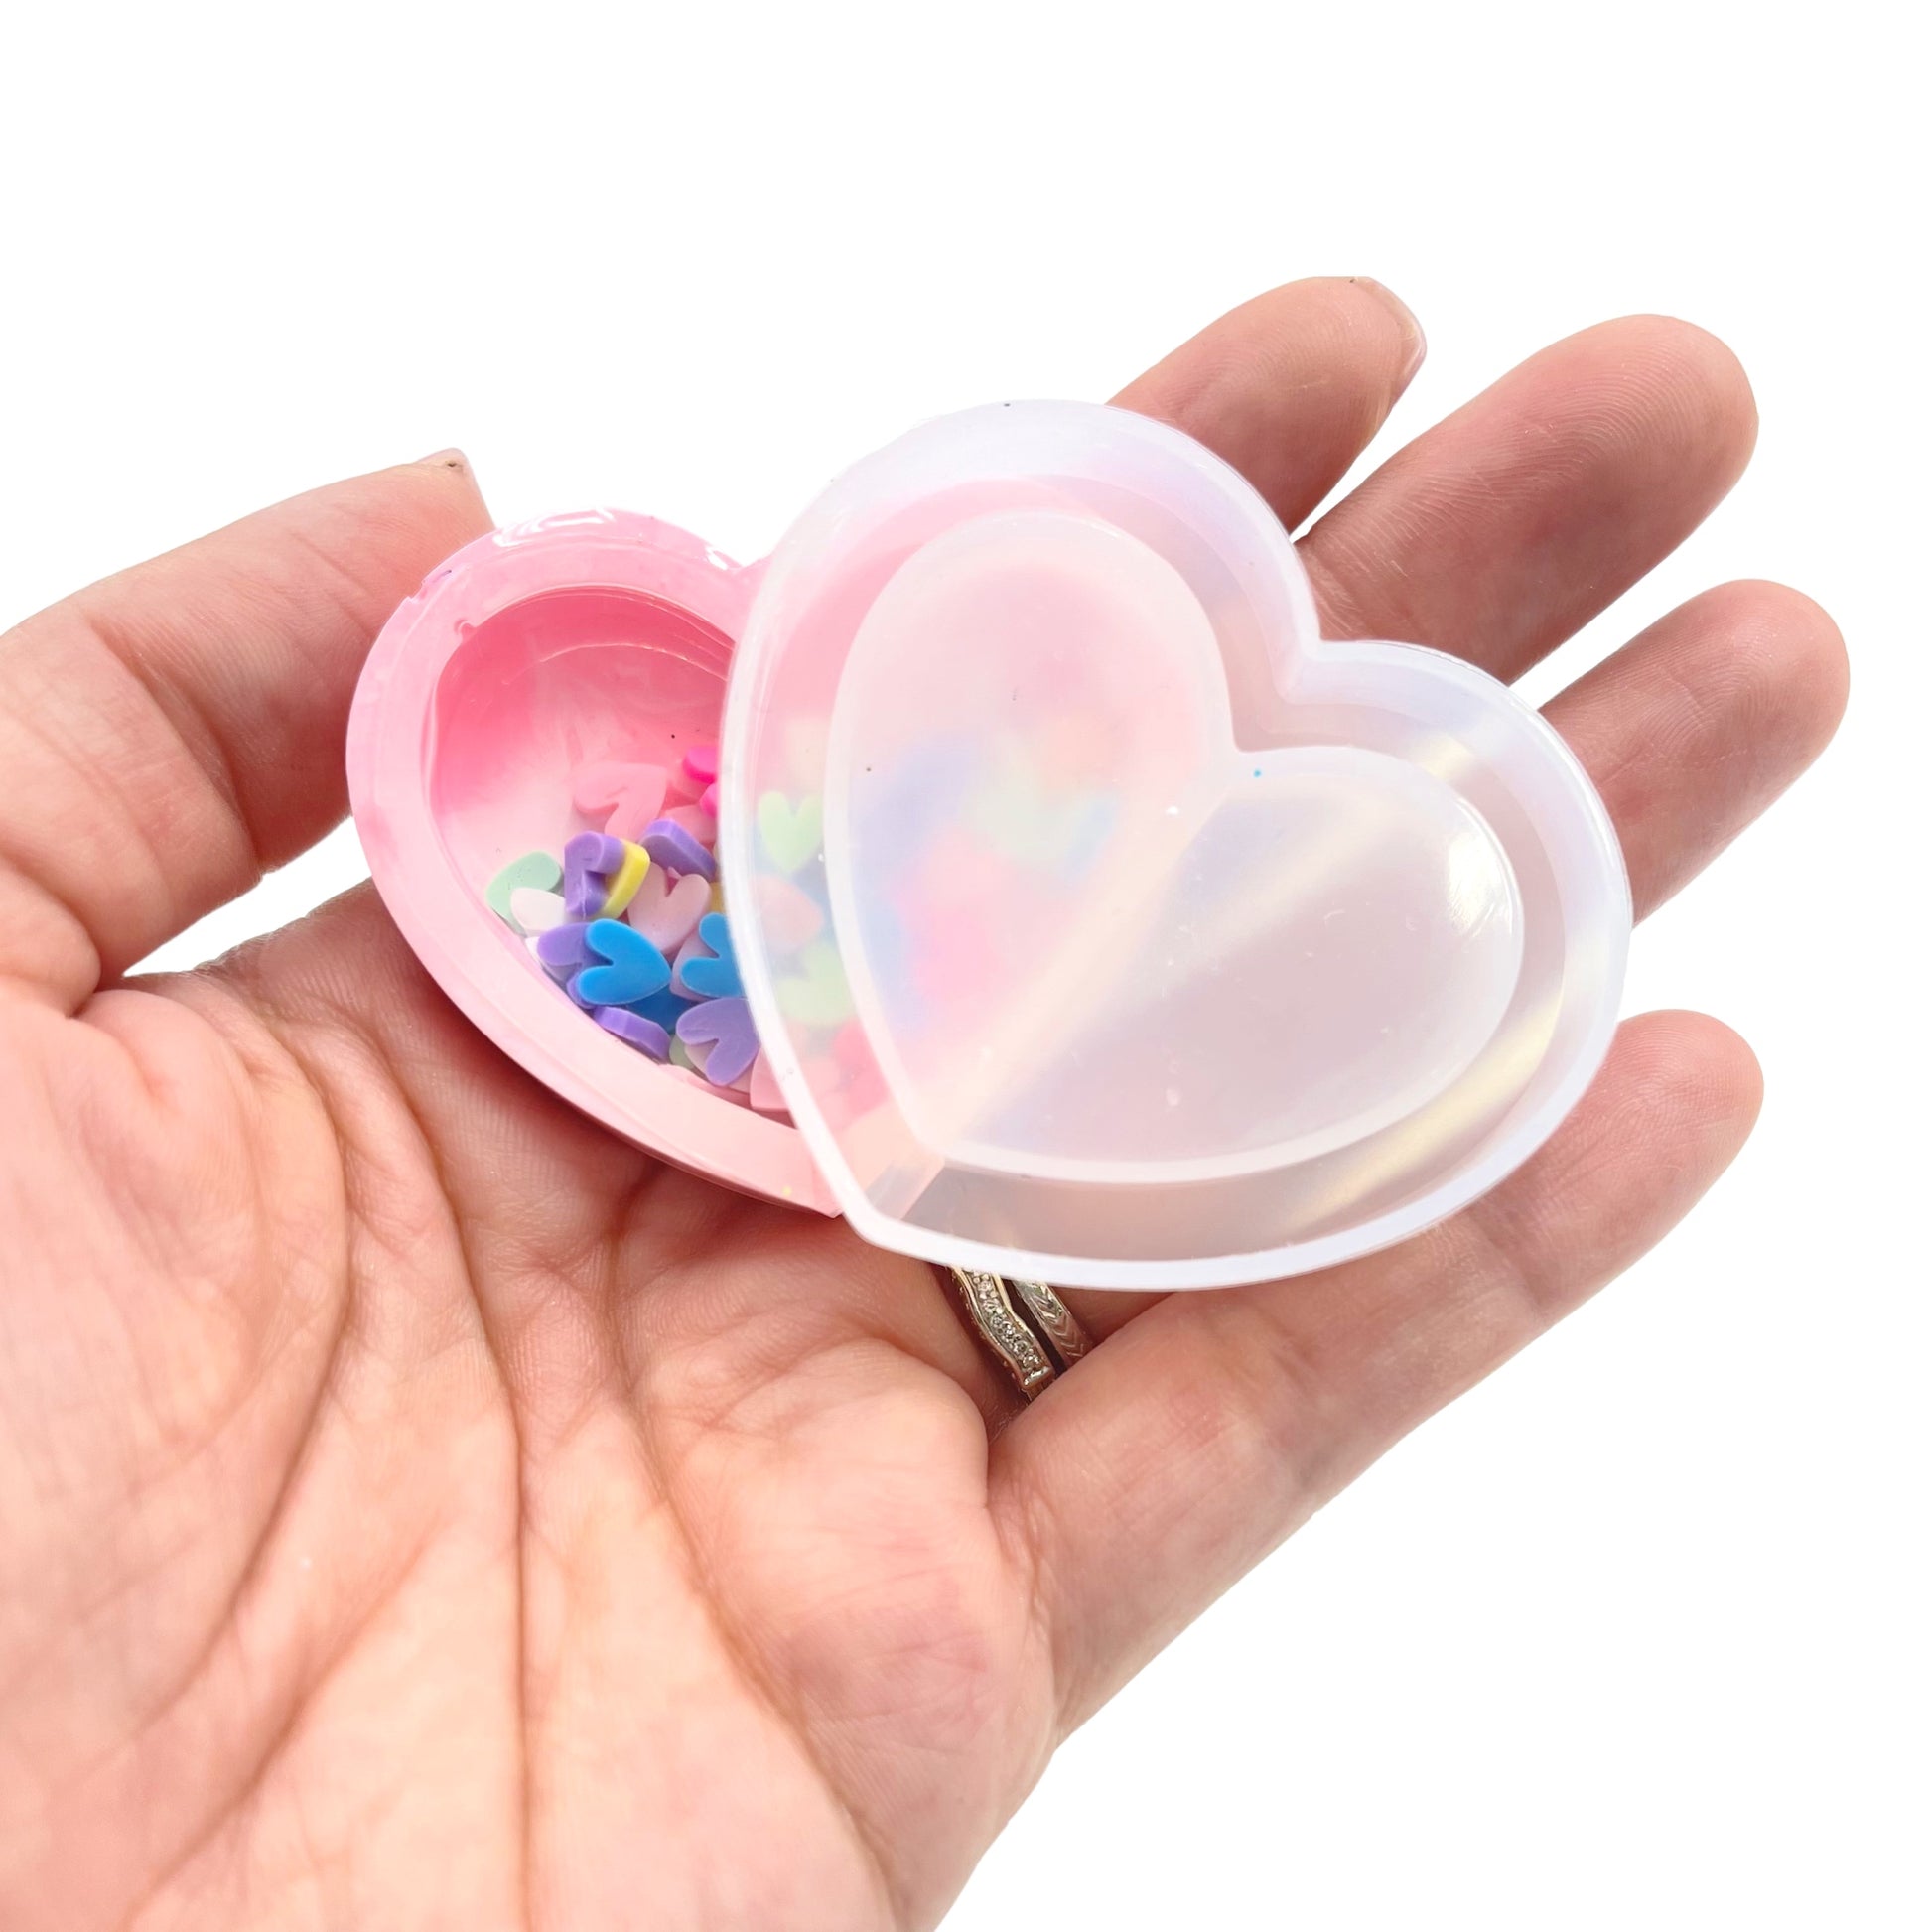 Double Heart Shaker Silicone Mold, Shaker Mould, Heart Shaker Mold, Clear Resin Mold, Silicone Flexible Mold